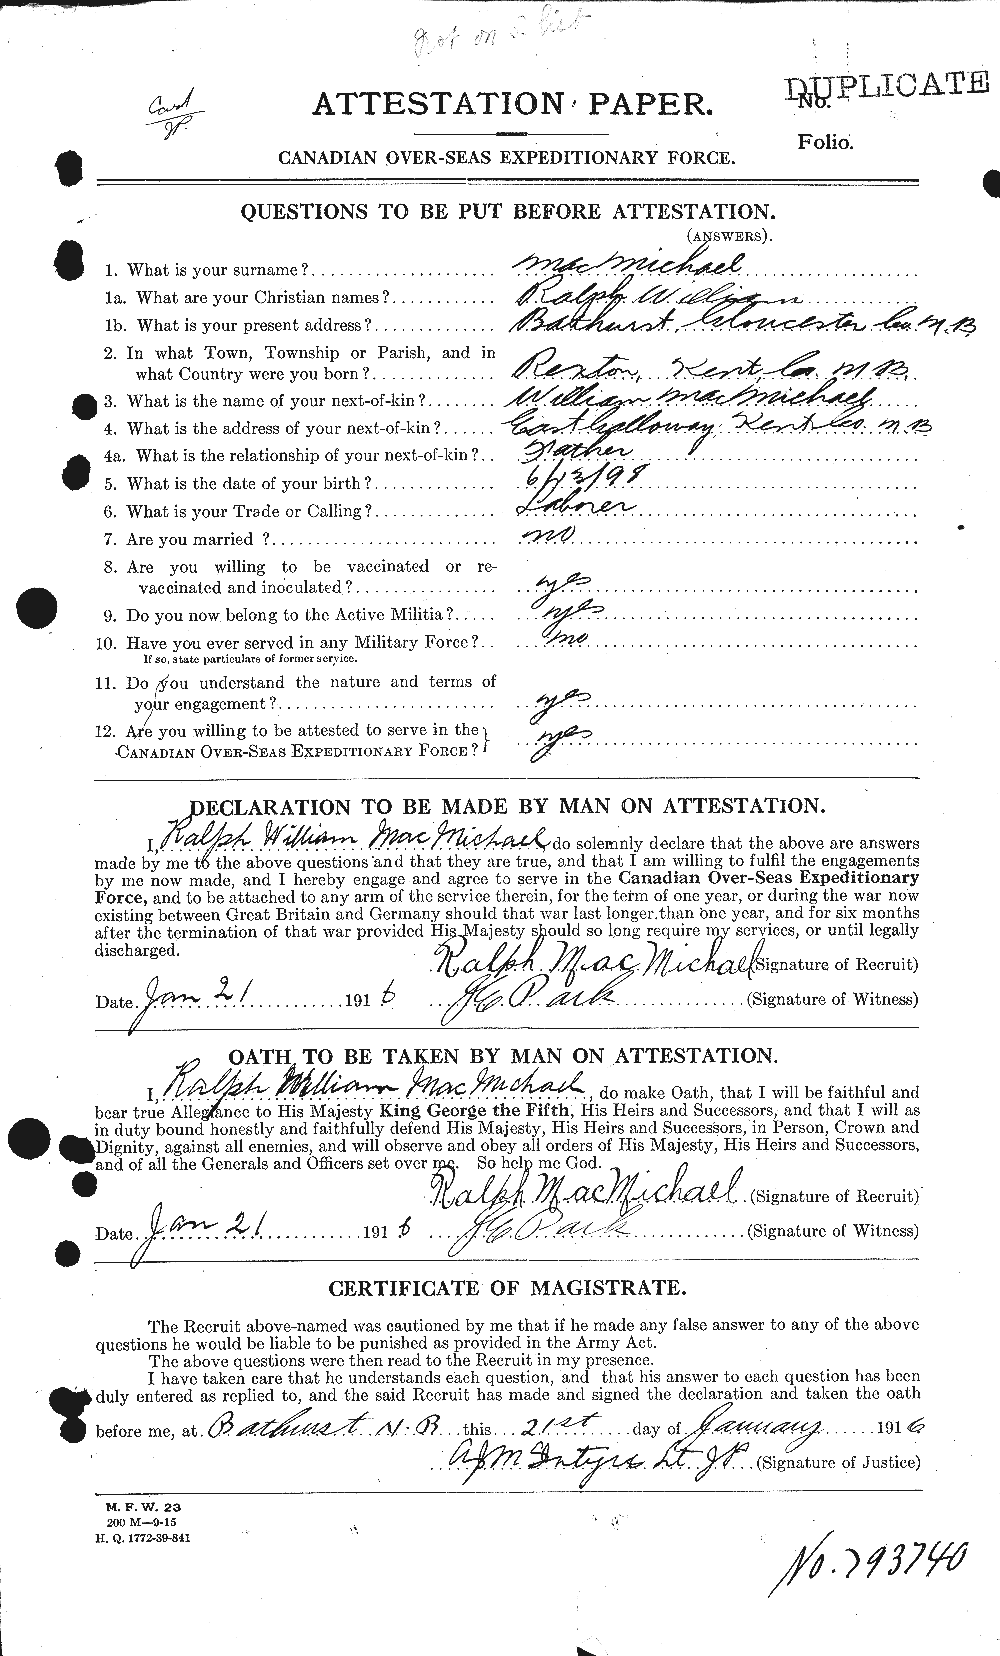 Personnel Records of the First World War - CEF 537448a